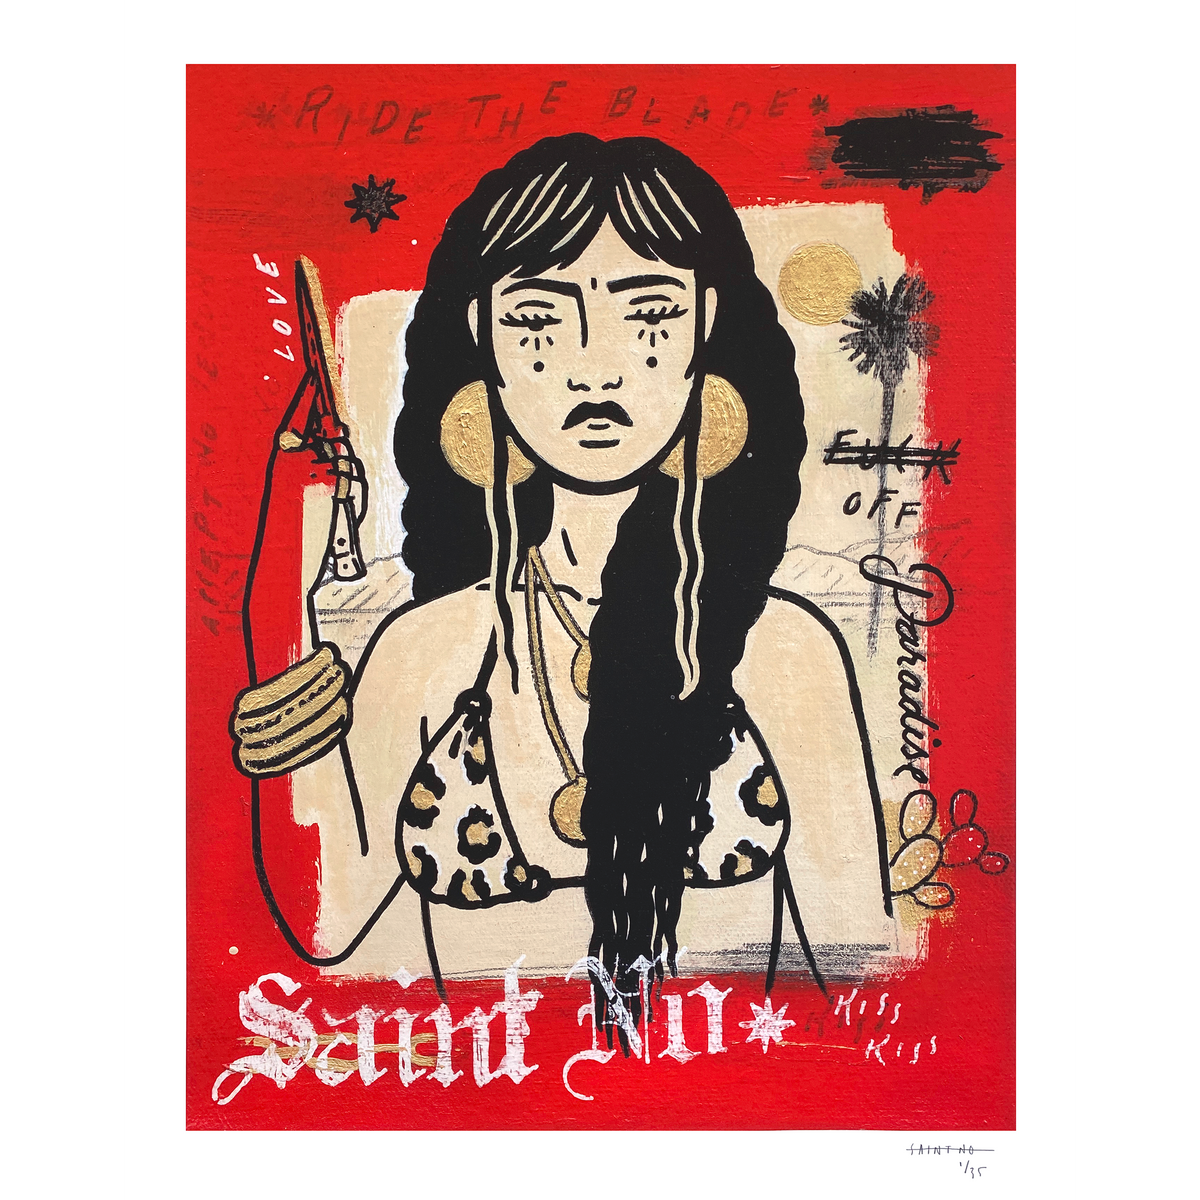 SAINT NO &quot;To Dance Another Day&quot; - Archival Print, Limited Edition of 35 - 16 x 20&quot;